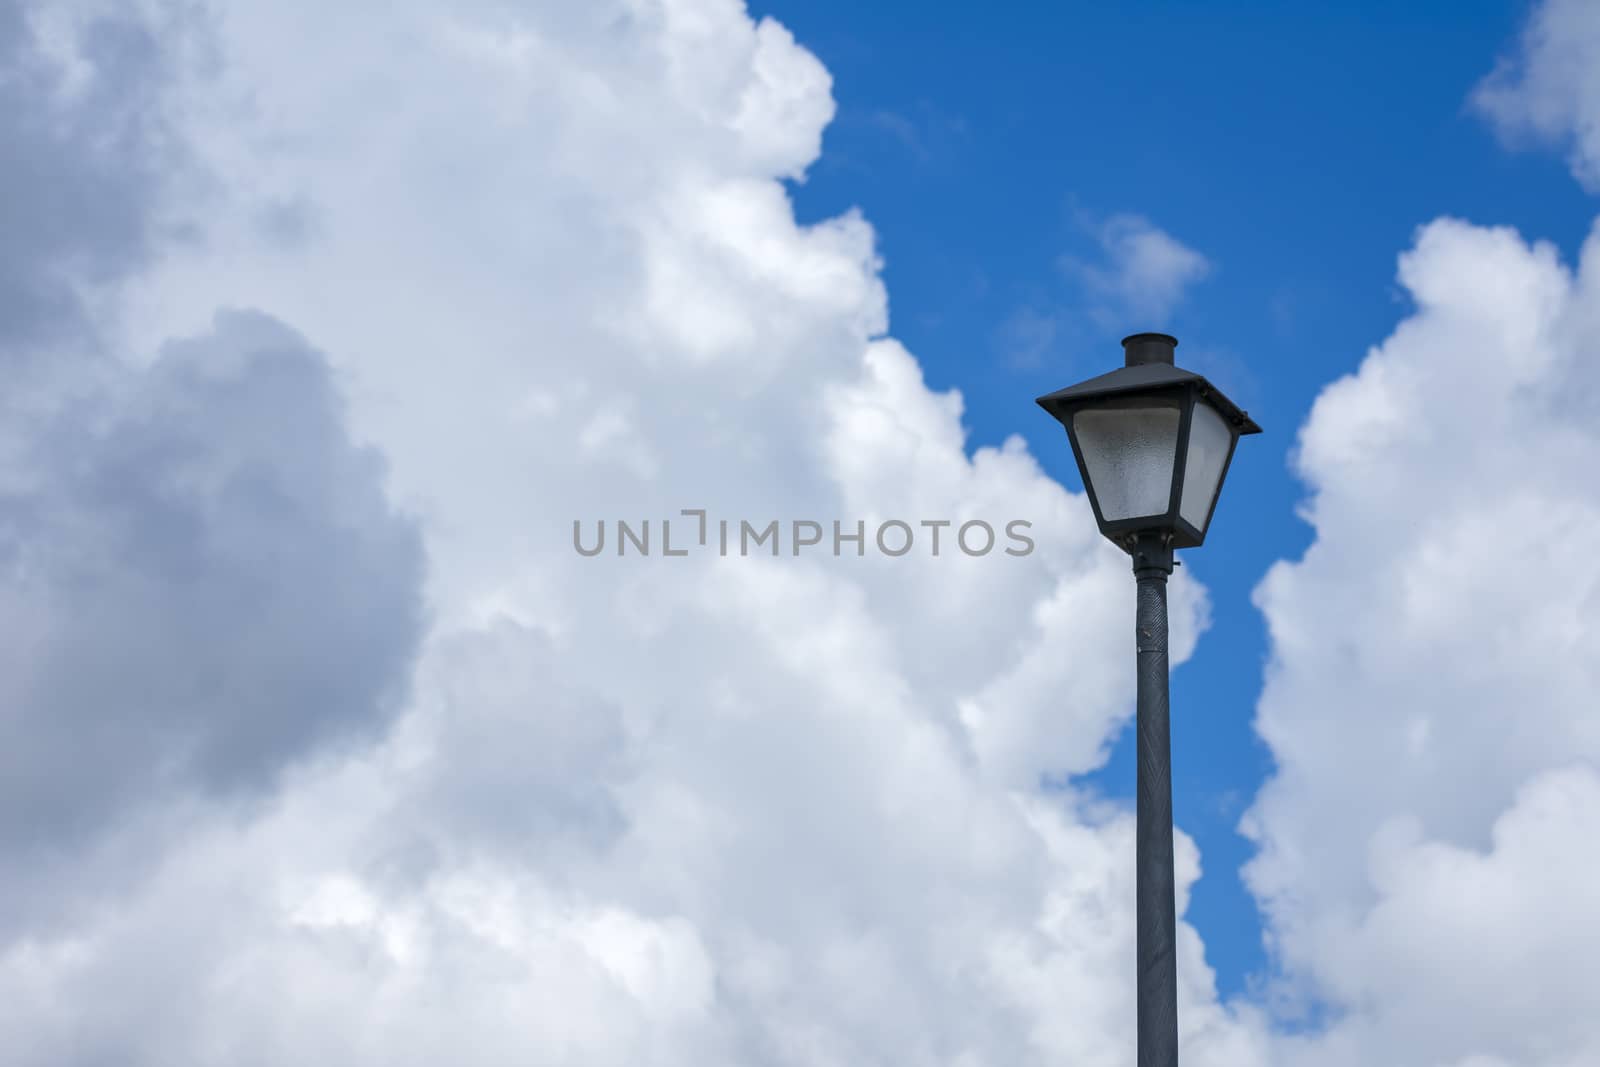 Lamppost Against Cloudy Sky With Copy Space by stockbuster1